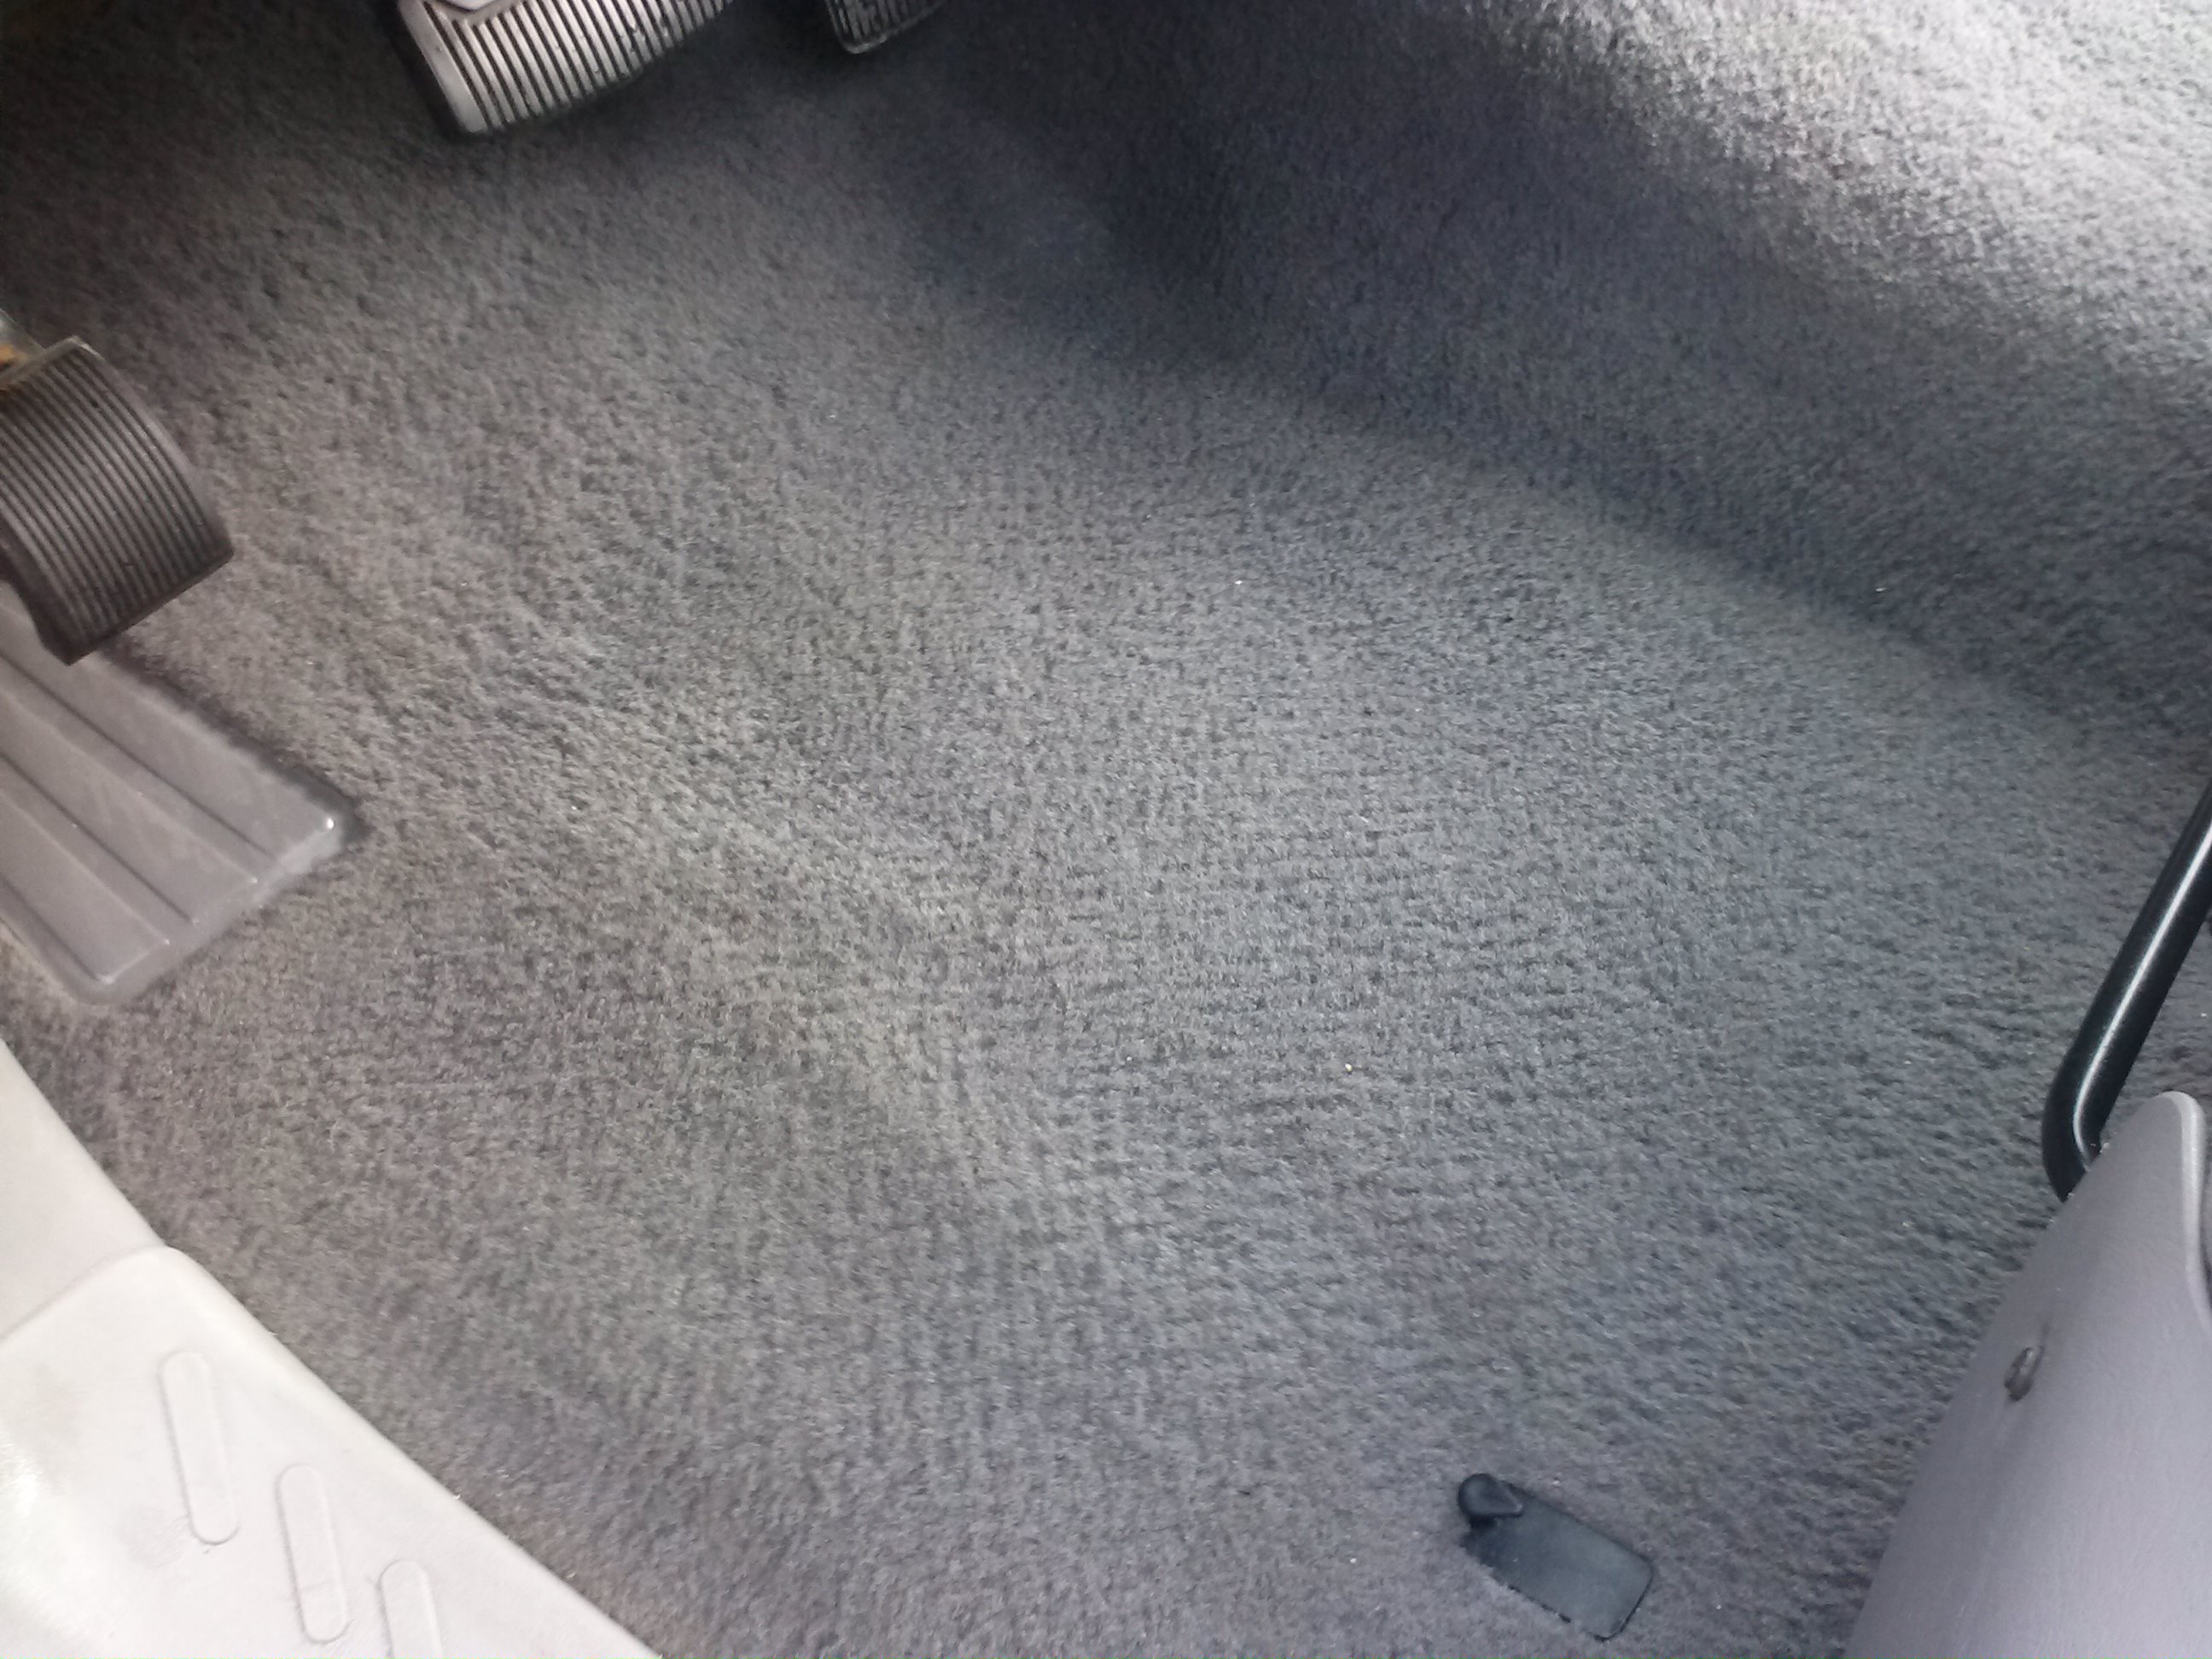 Detailing Car Carpet: Before And After